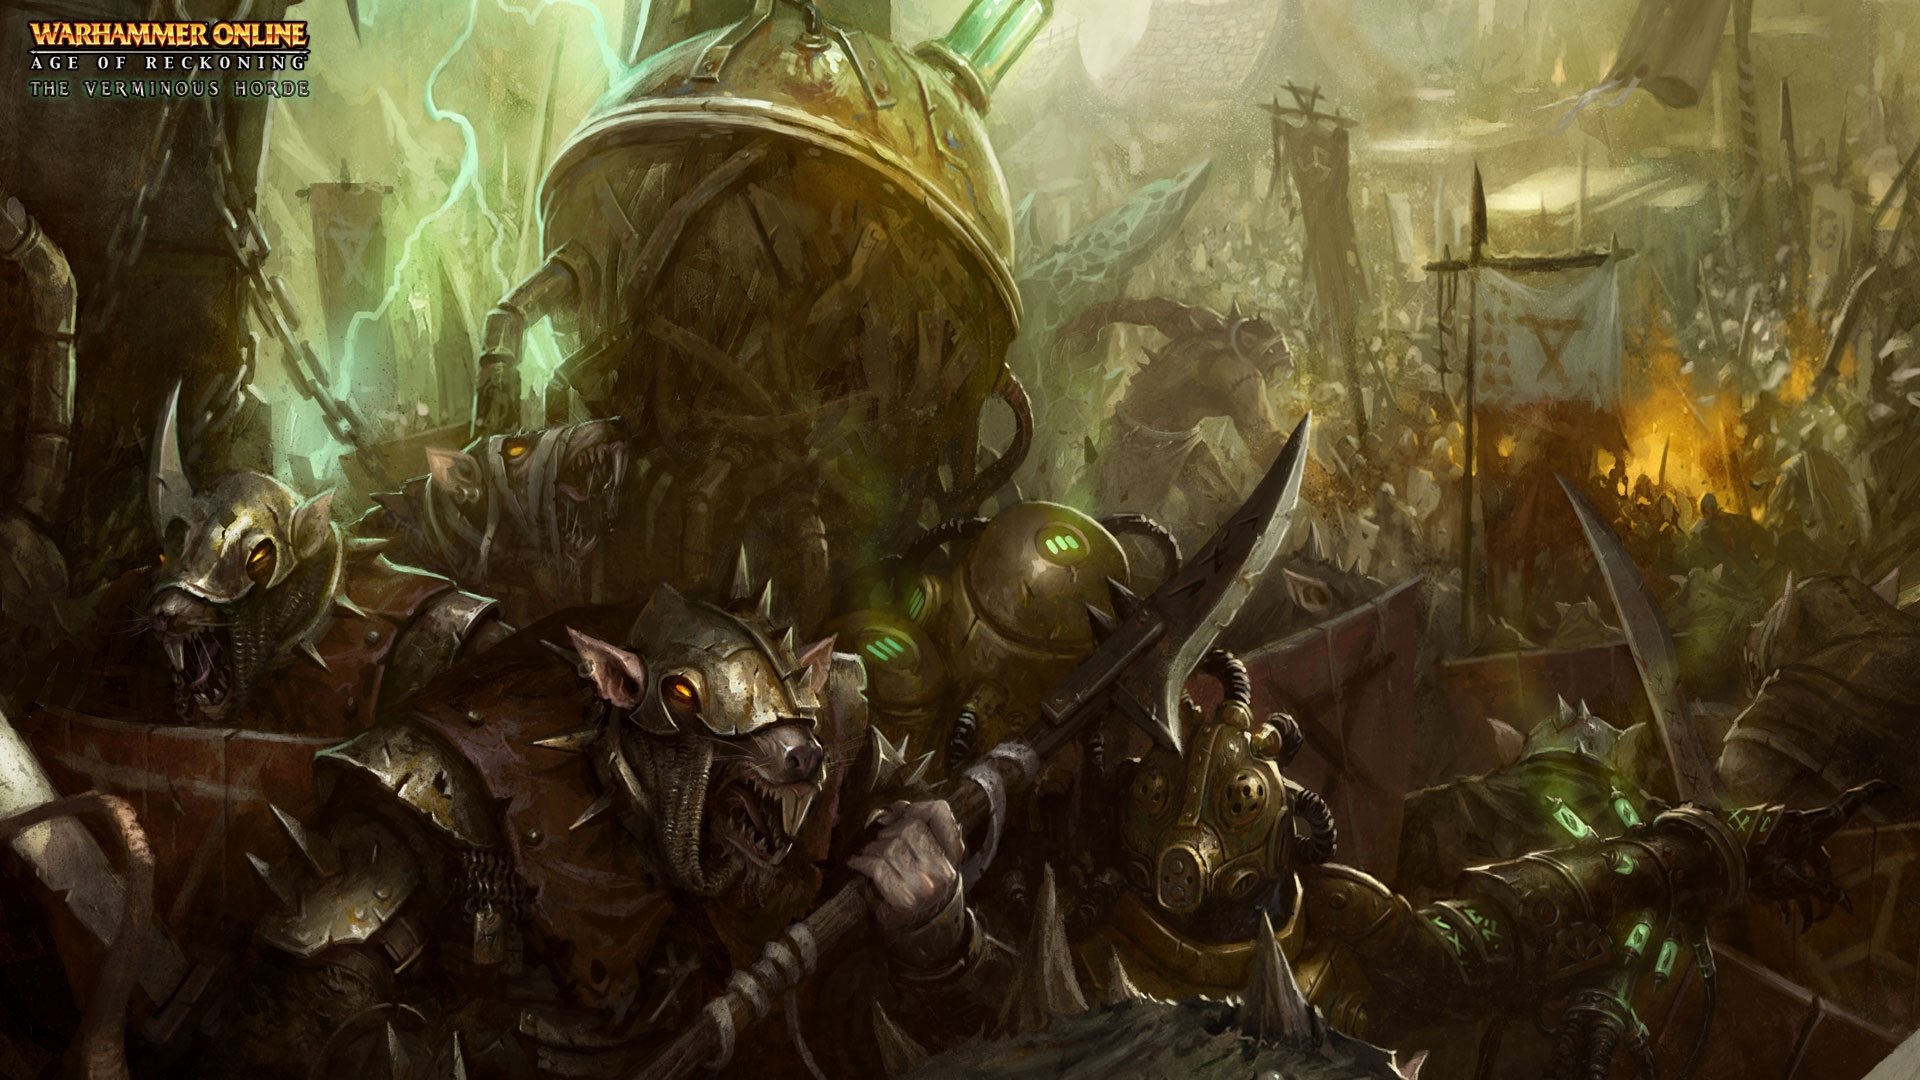 Download 1080p Warhammer Online: Age Of Reckoning PC background ID:253723 for free